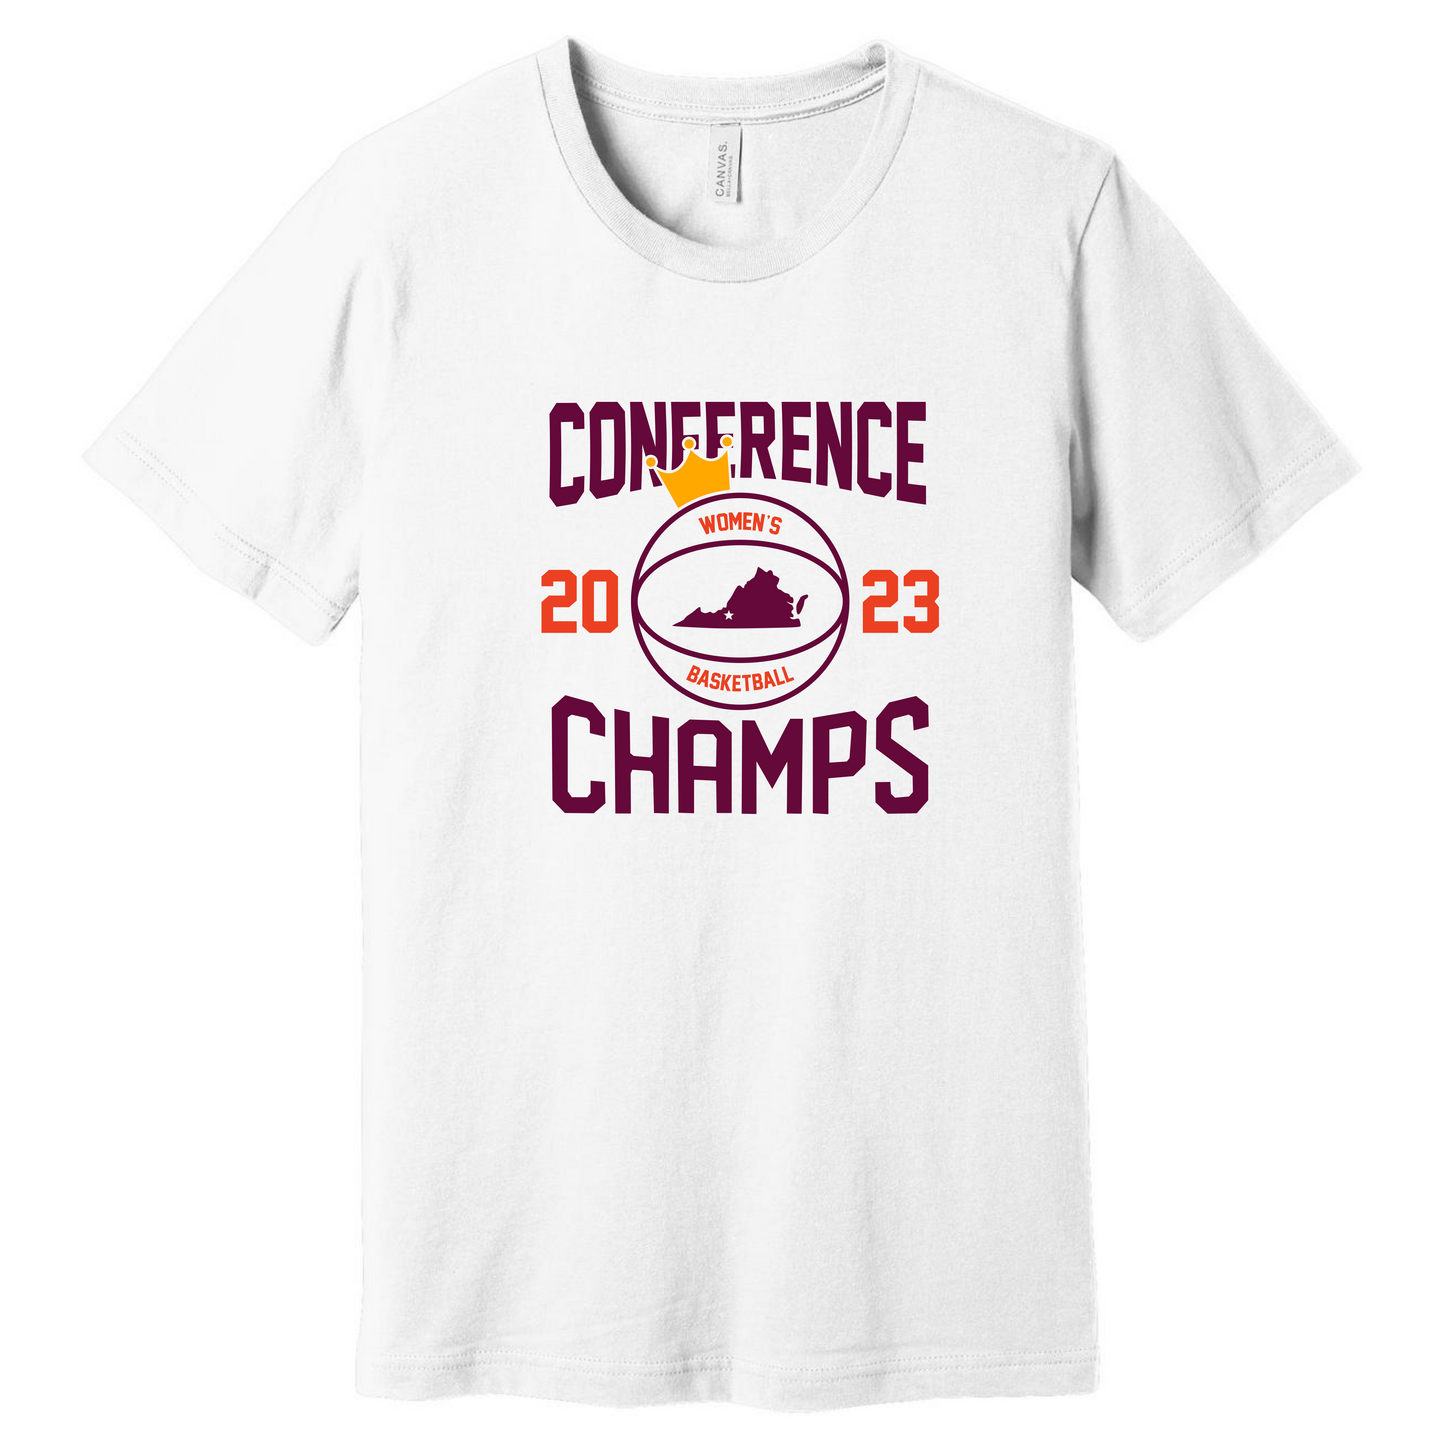 Conference Champs Apparel